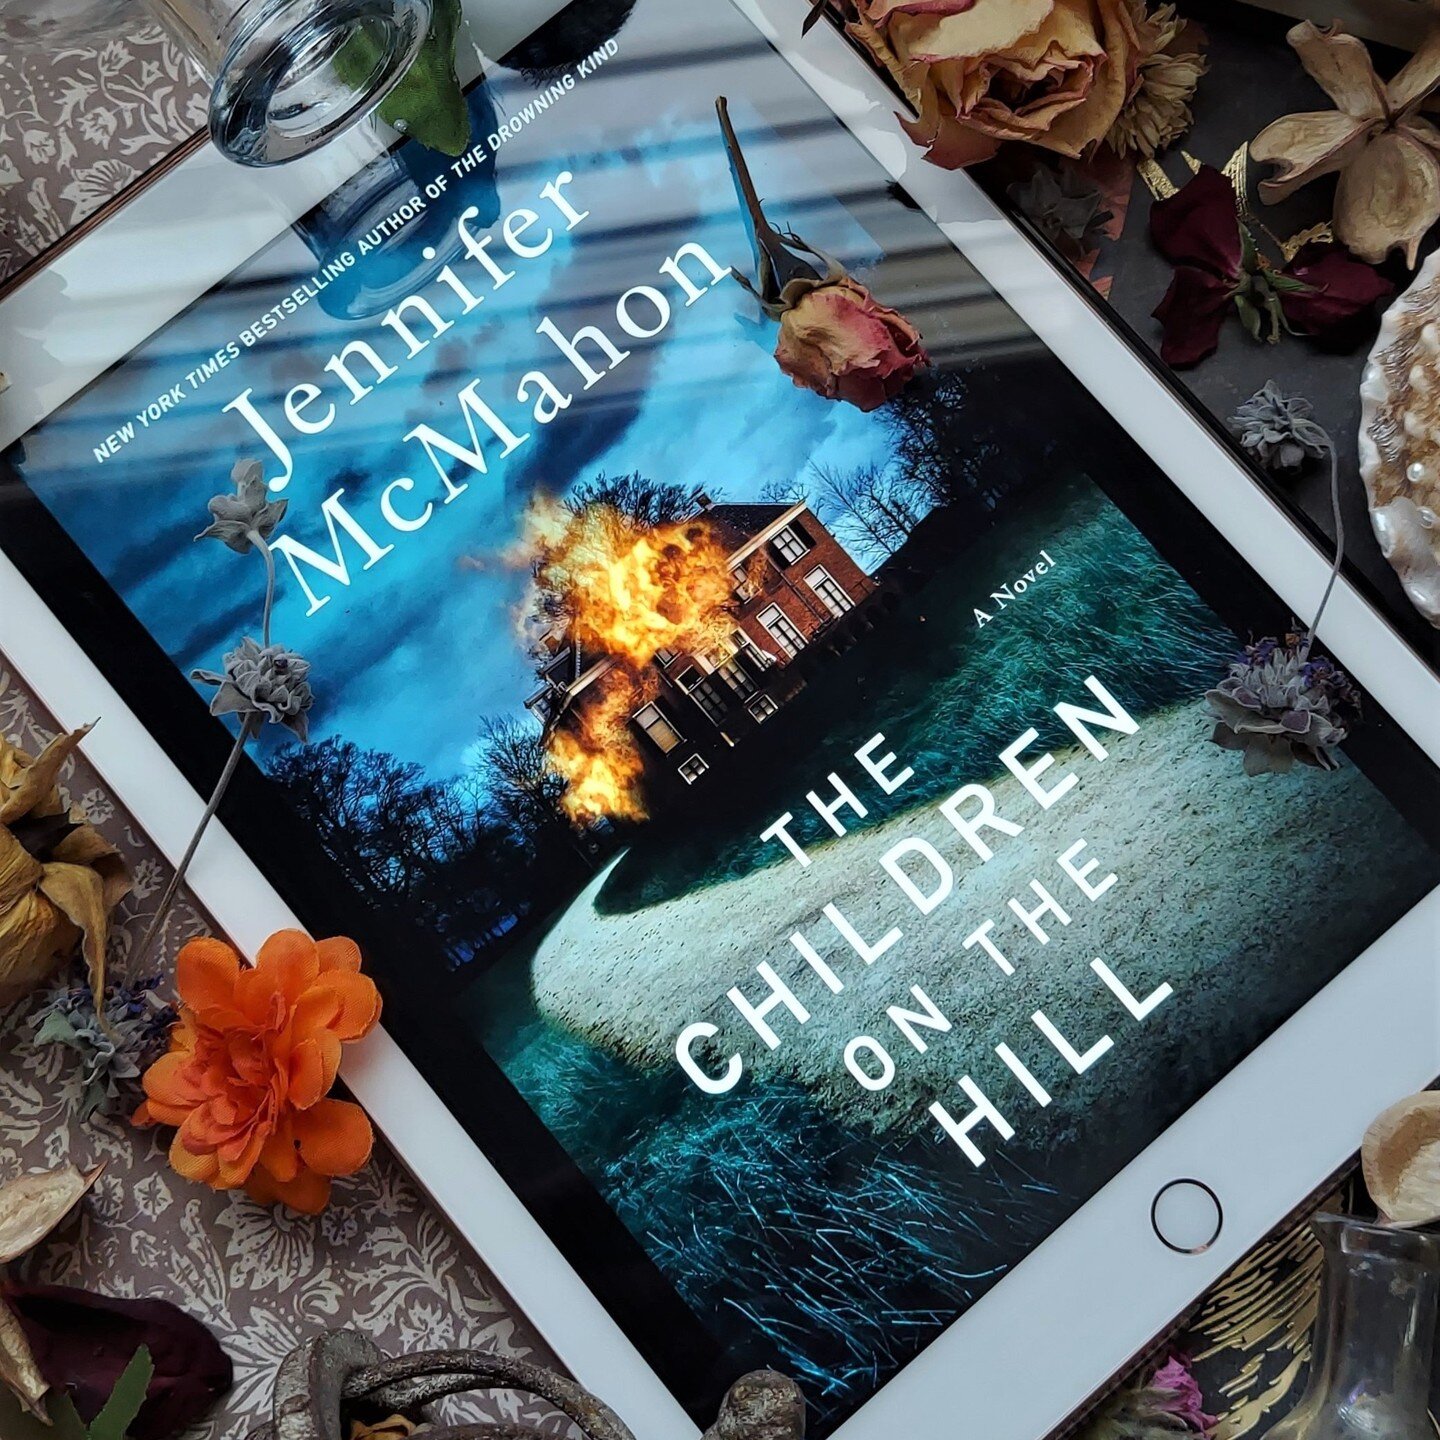 THE CHILDREN ON THE HILL by Jennifer McMahon is a mash-up of monster hunting, eerie suspense, weird science, and Mary Shelley&rsquo;s Frankenstein!

The writing is sharp and atmospheric; readers will not be disappointed with the suspenseful buildup. 